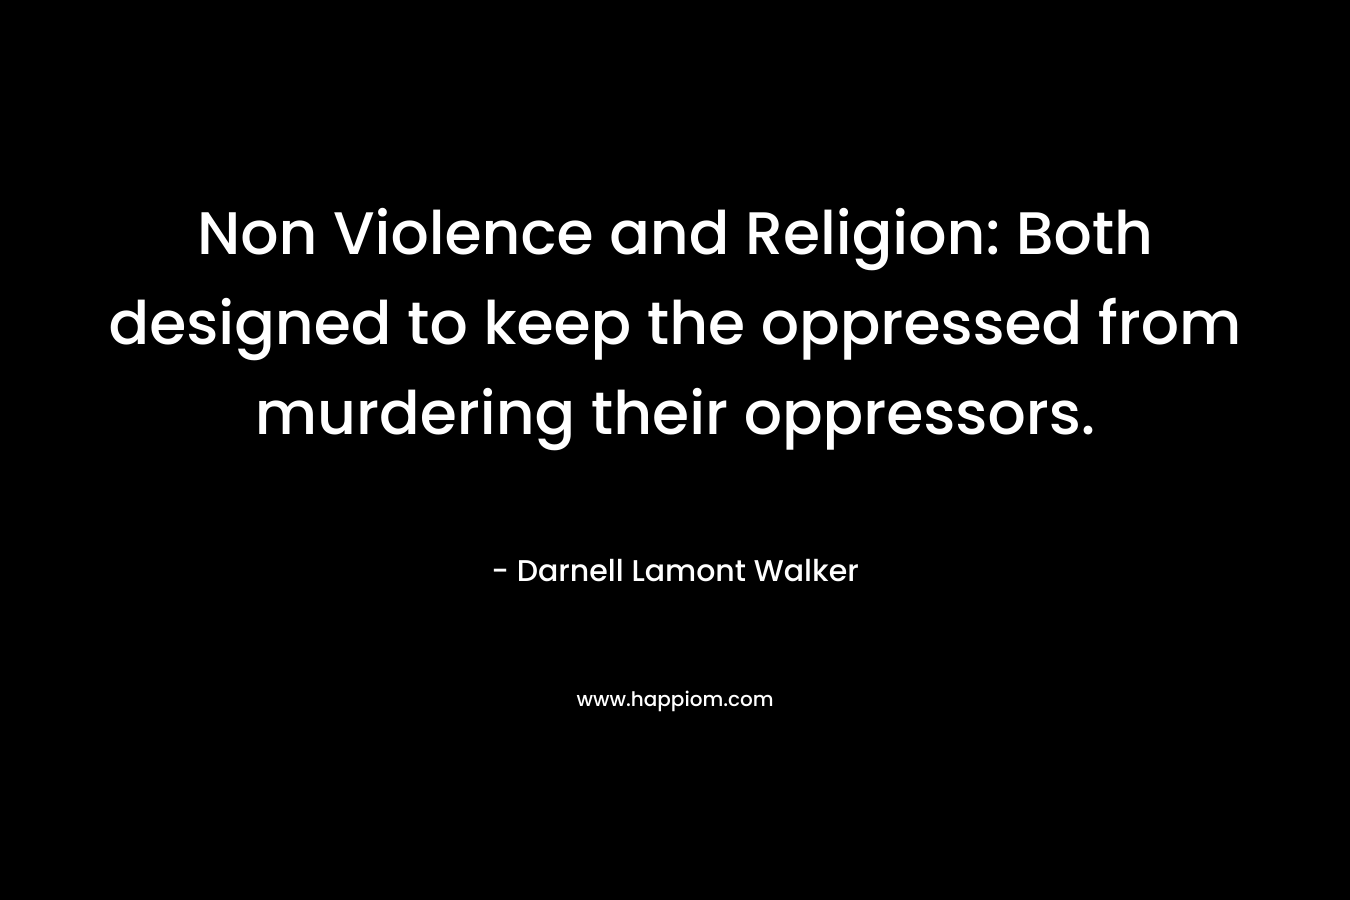 Non Violence and Religion: Both designed to keep the oppressed from murdering their oppressors.